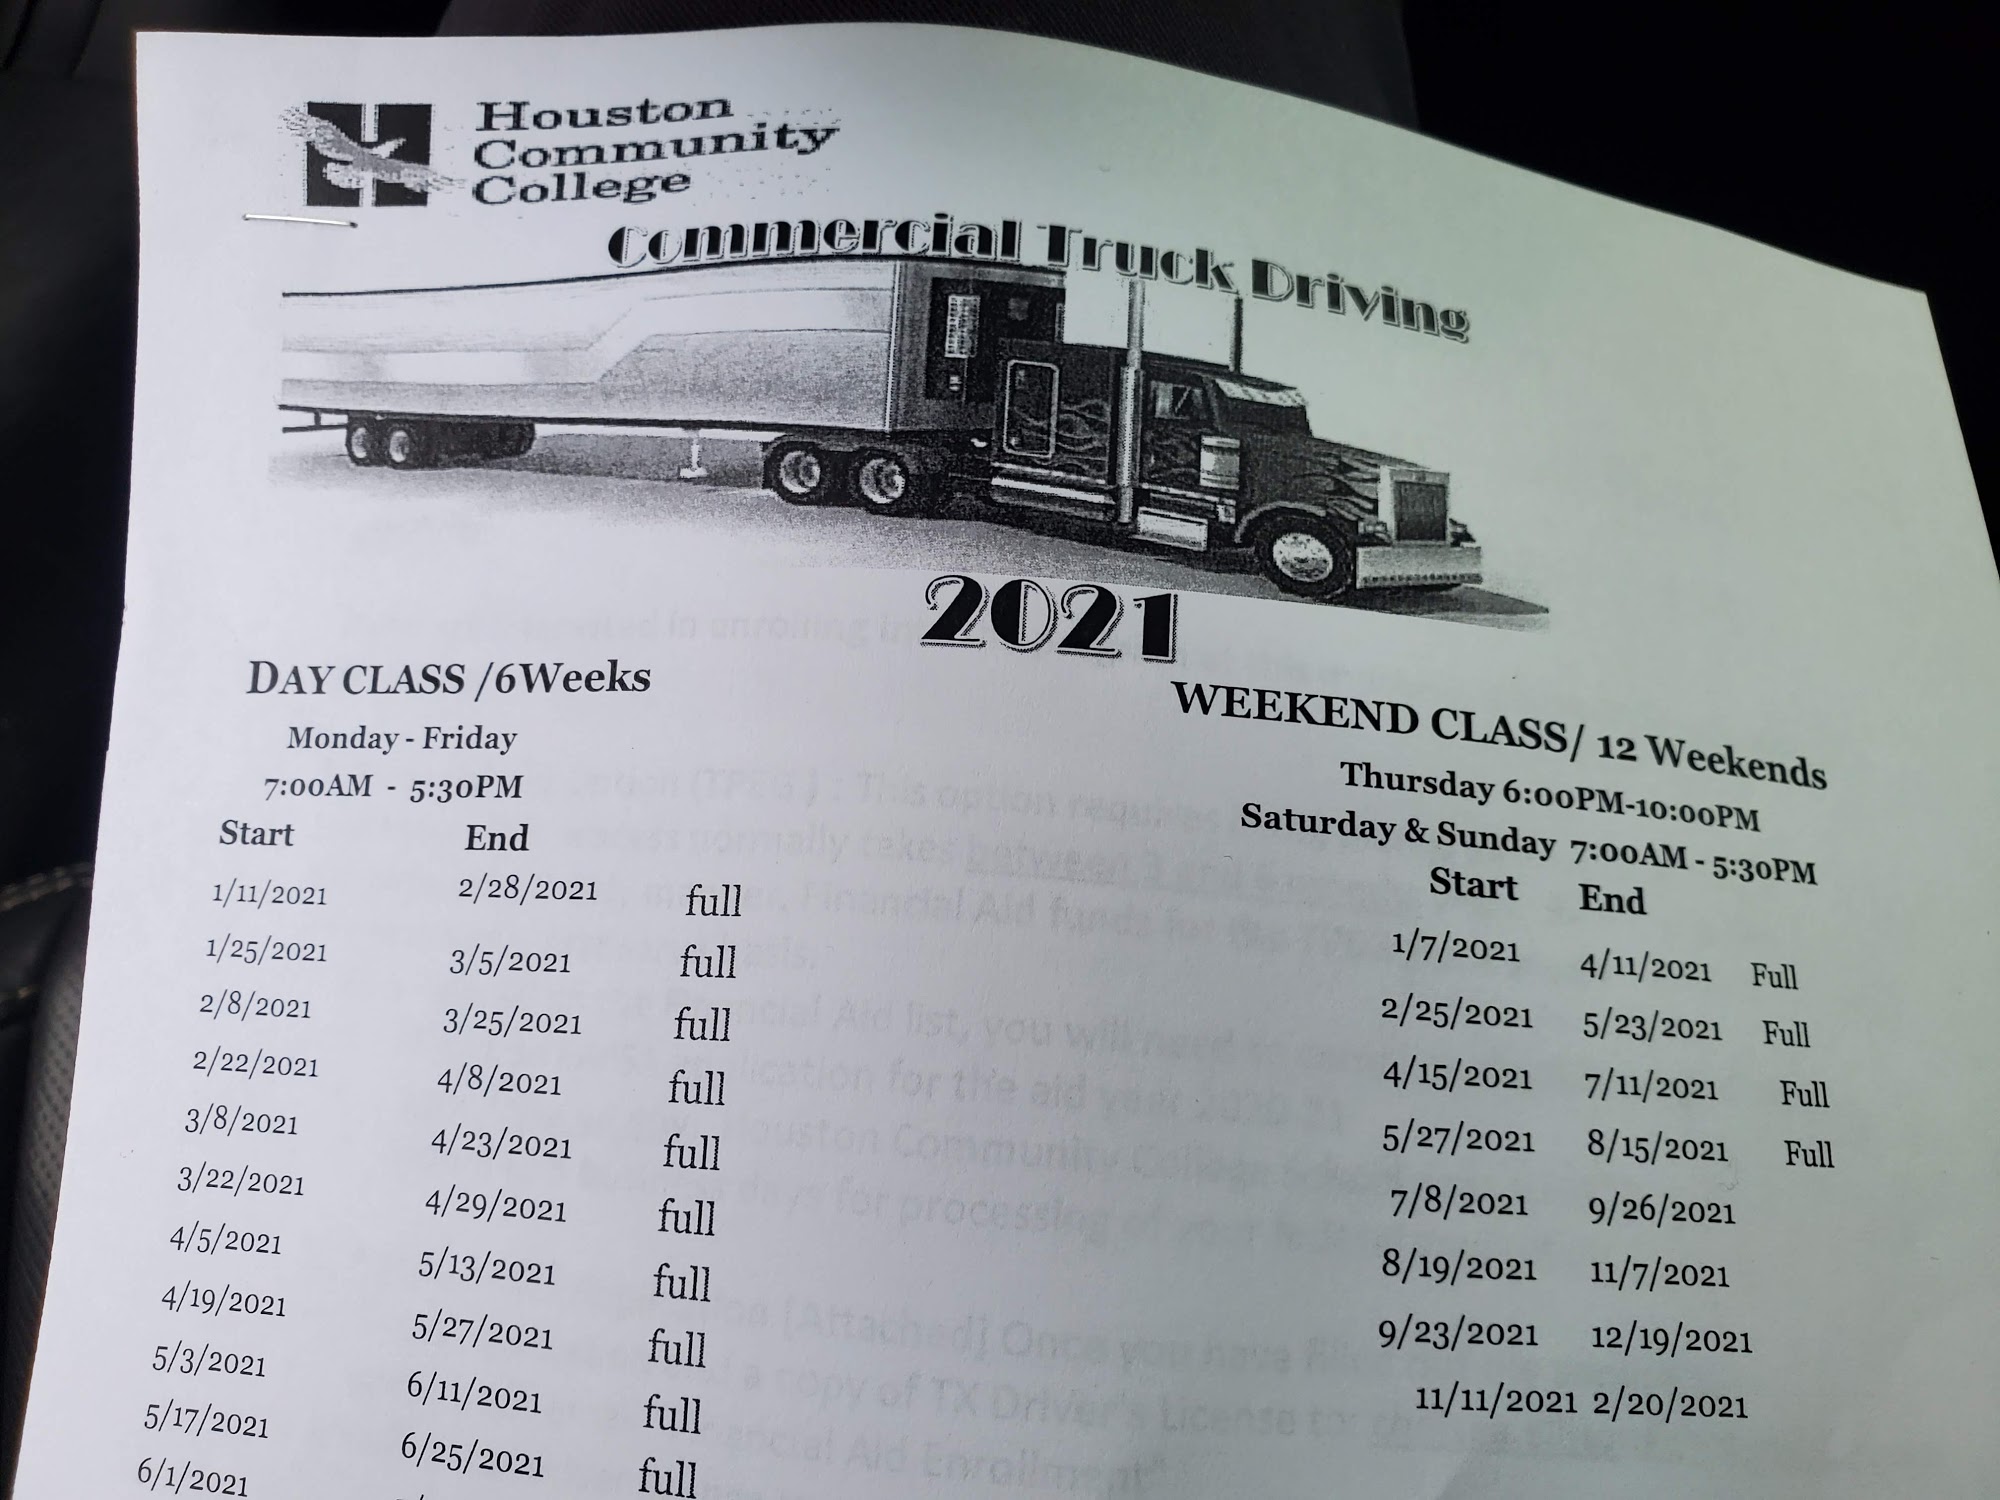 HCC Commercial Truck Driving